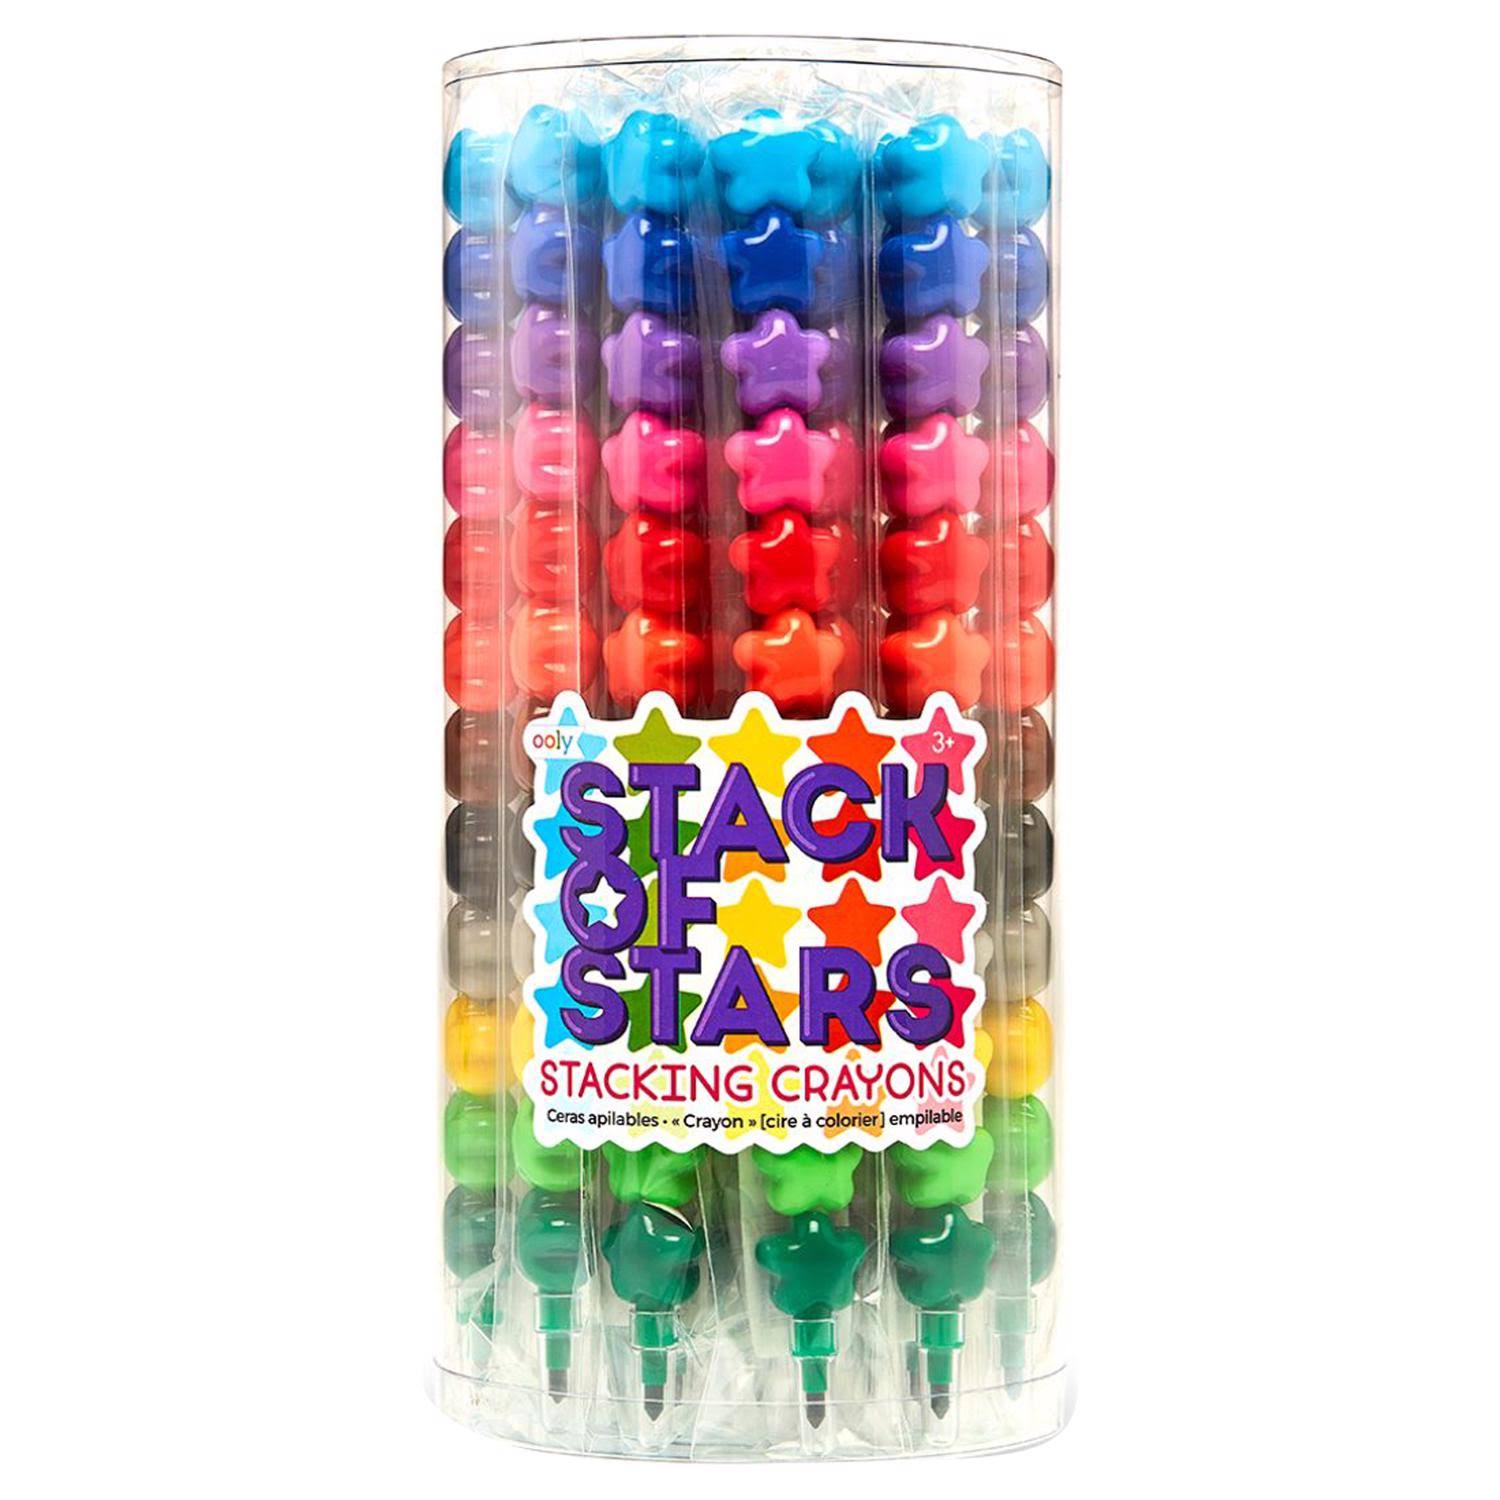 OOLY Stack of Stars Stacking Crayons